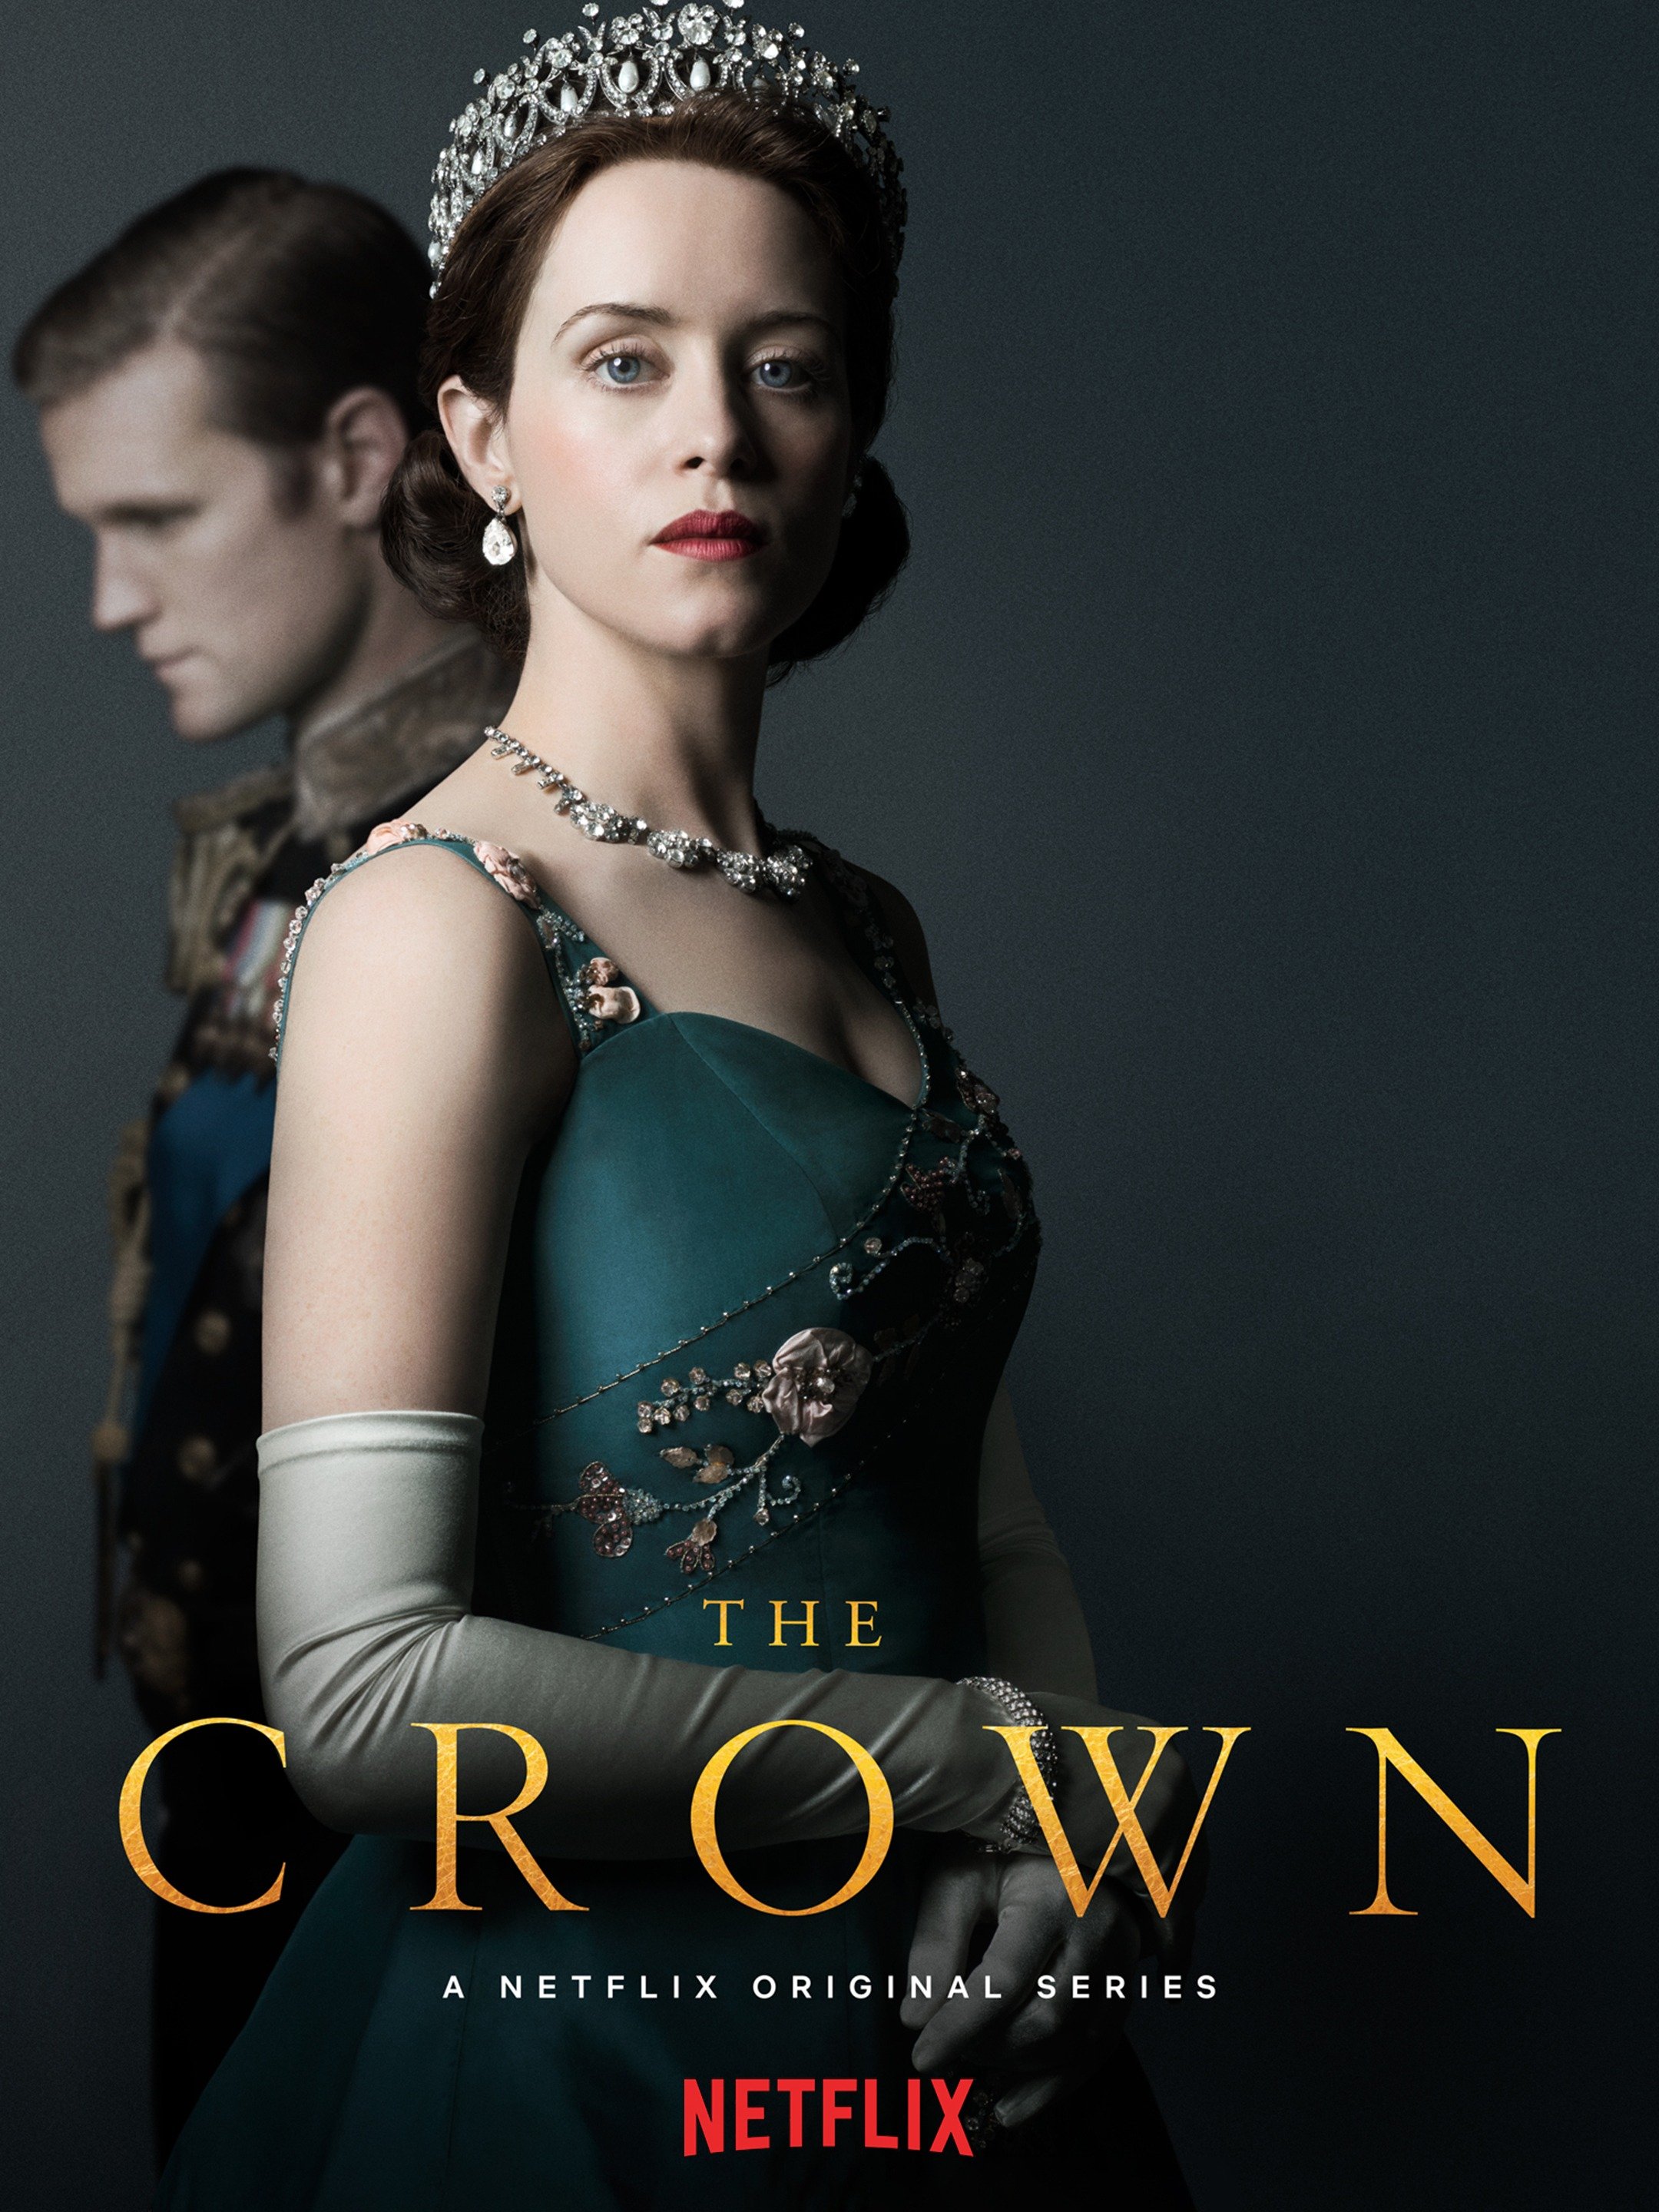 The Crown - Emmys 2021: See full list of winners